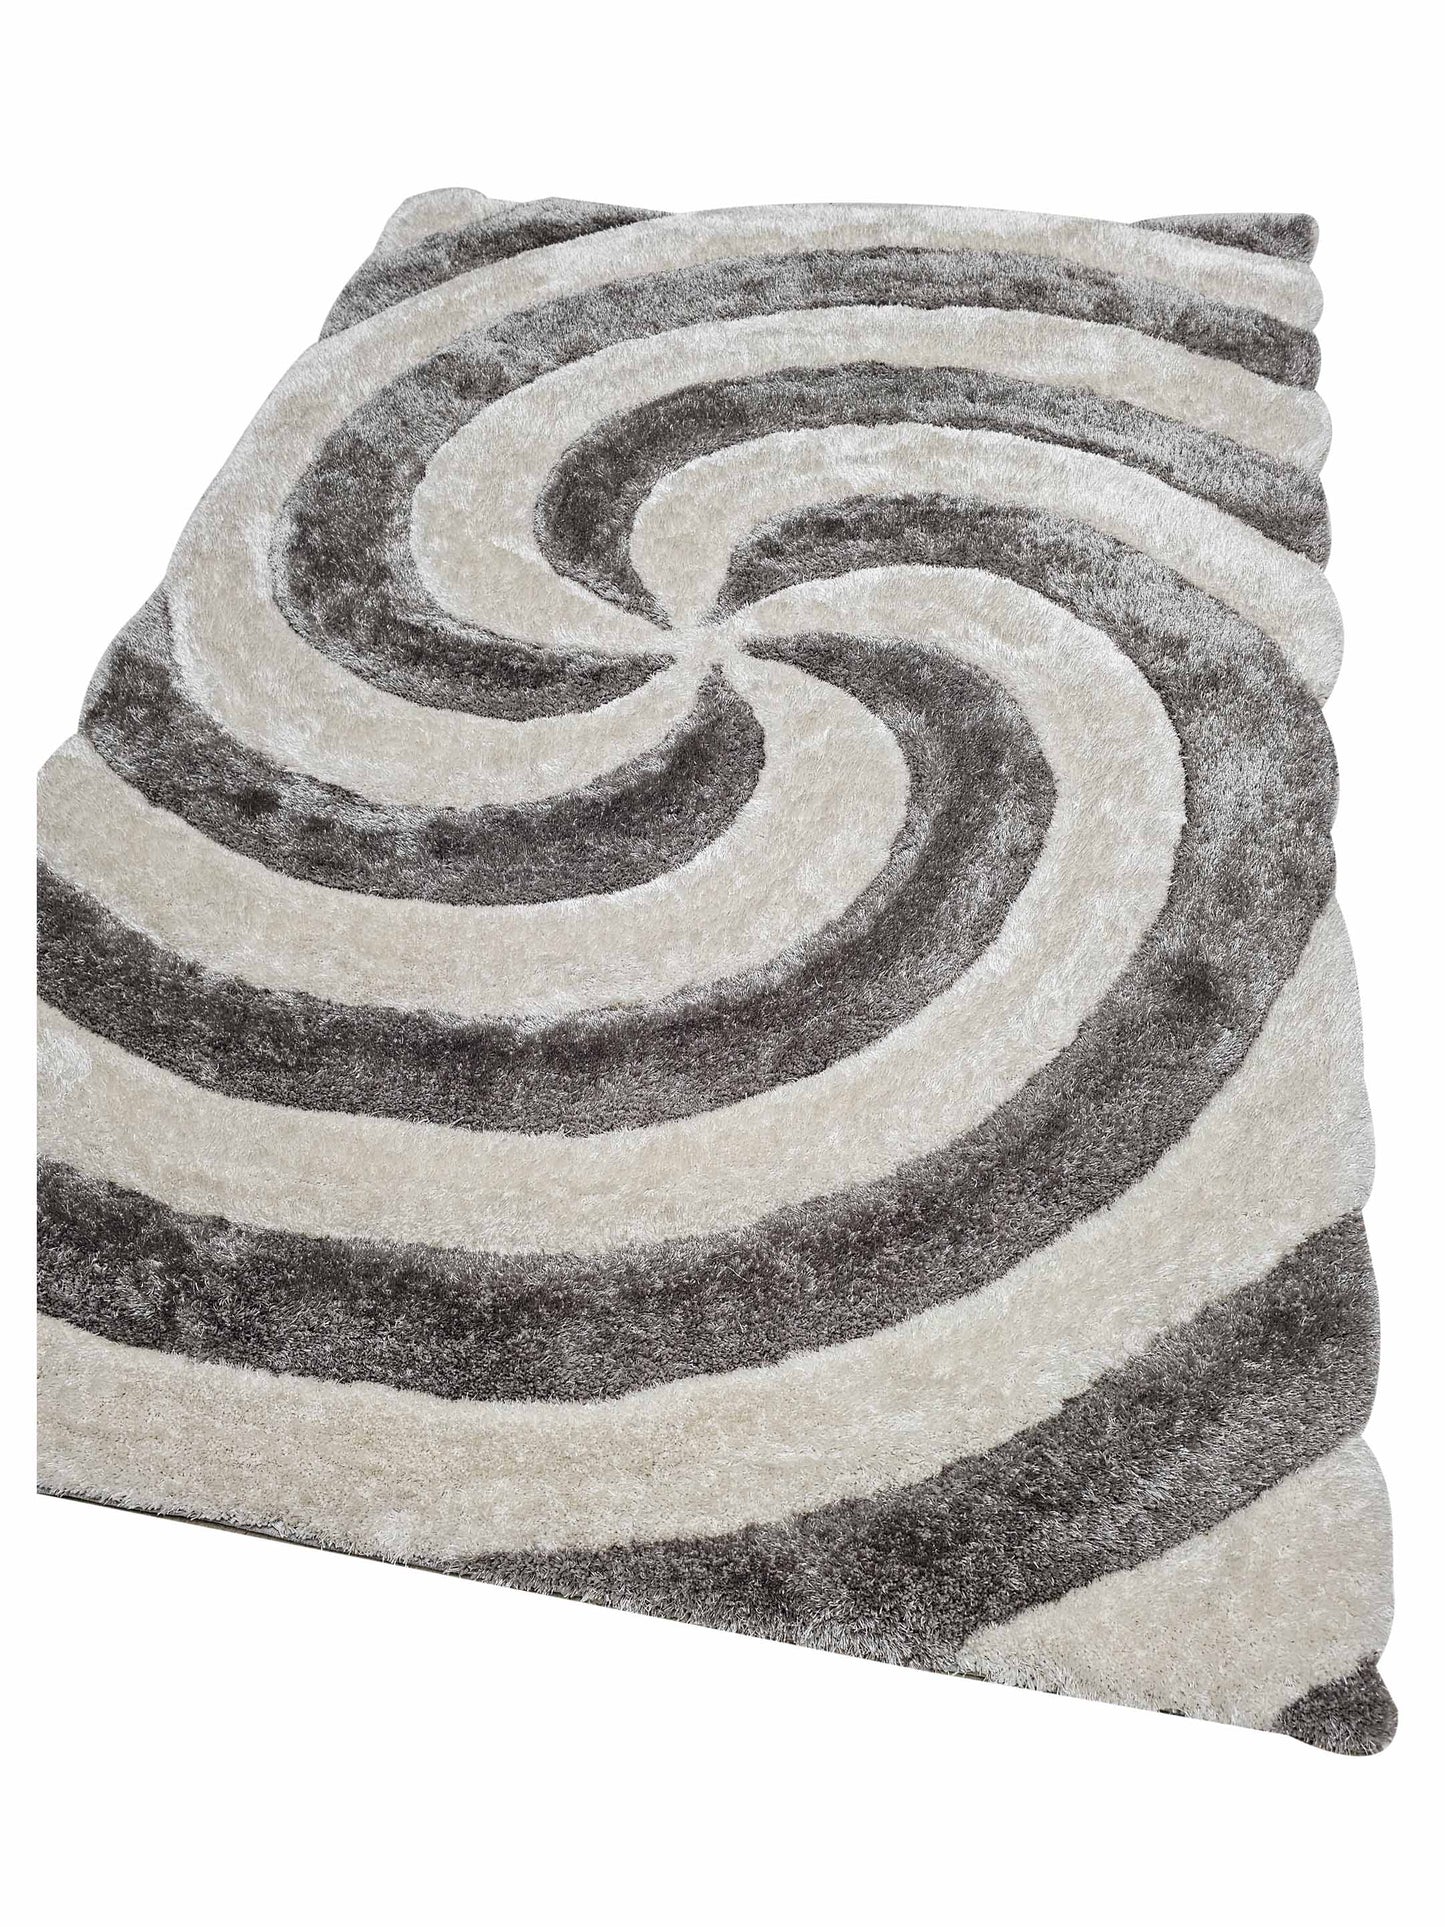 American Cover Design 3D Shaggy 3D 804 Silver Modern Tufted Rug